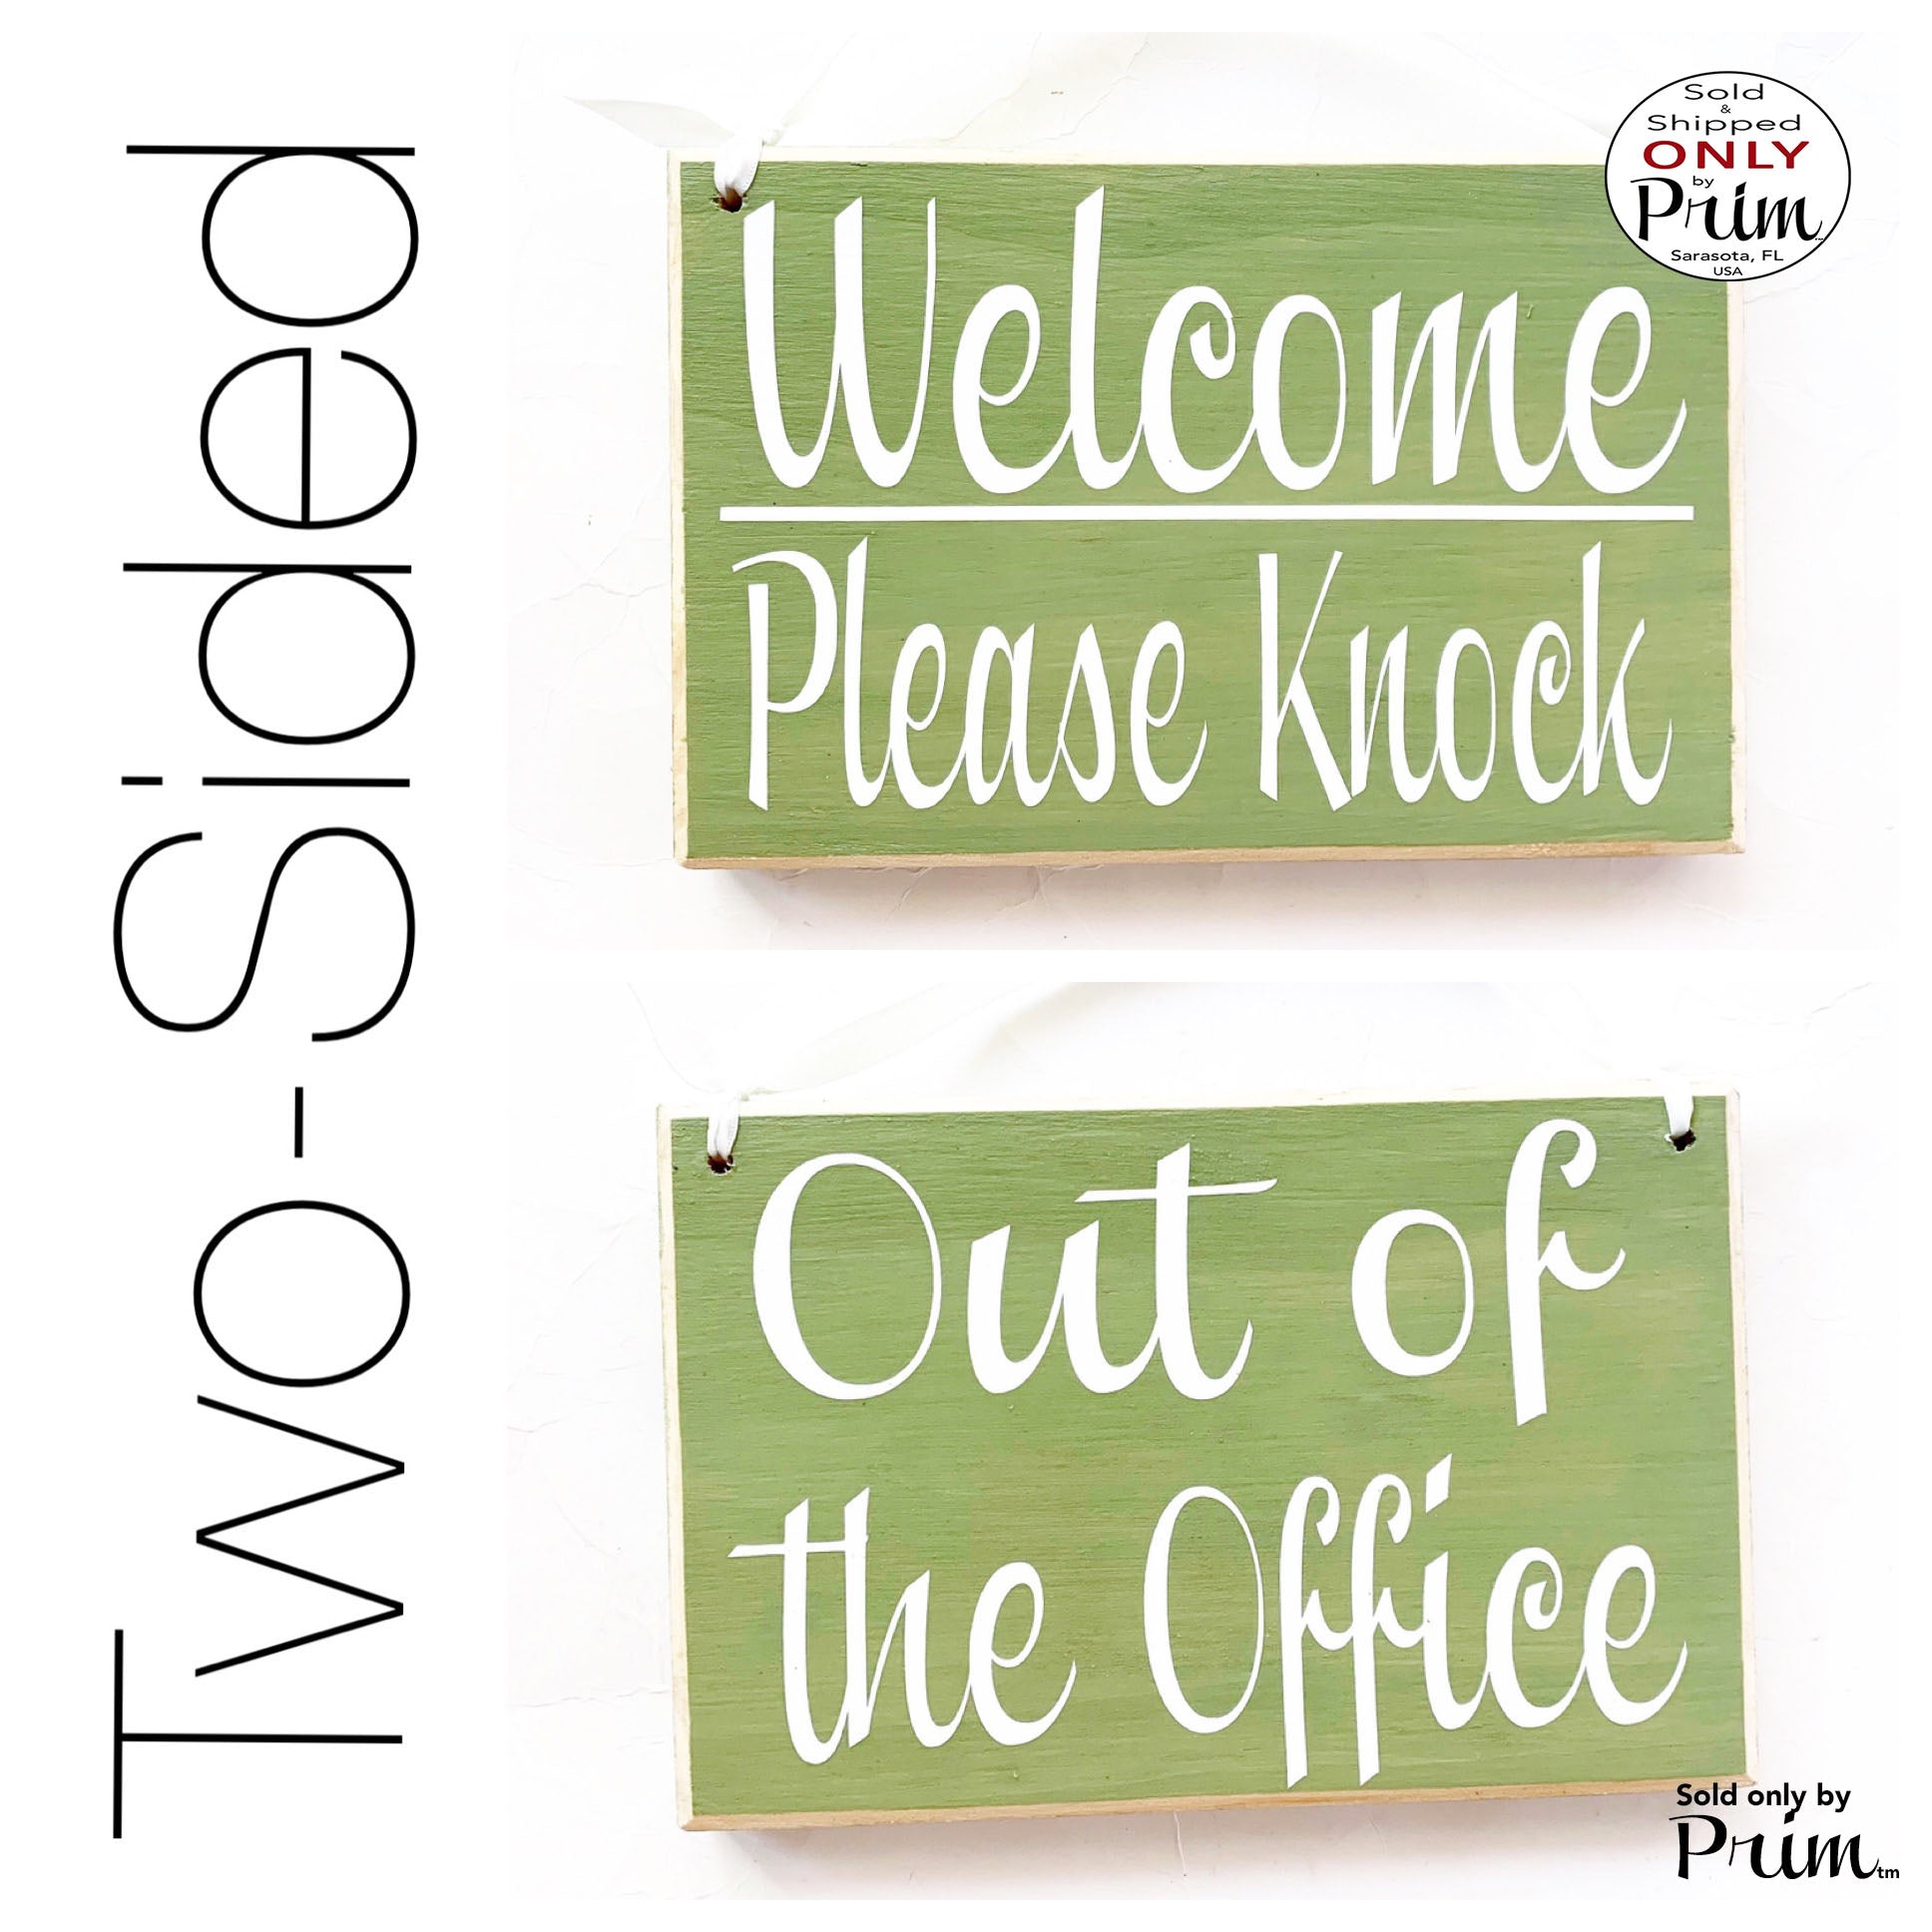 Two Sided 8x6 Out of Office Welcome Please Knock Custom Wood Sign | Open Closed Sorry We Missed You Be Back Shortly Office Door Plaque